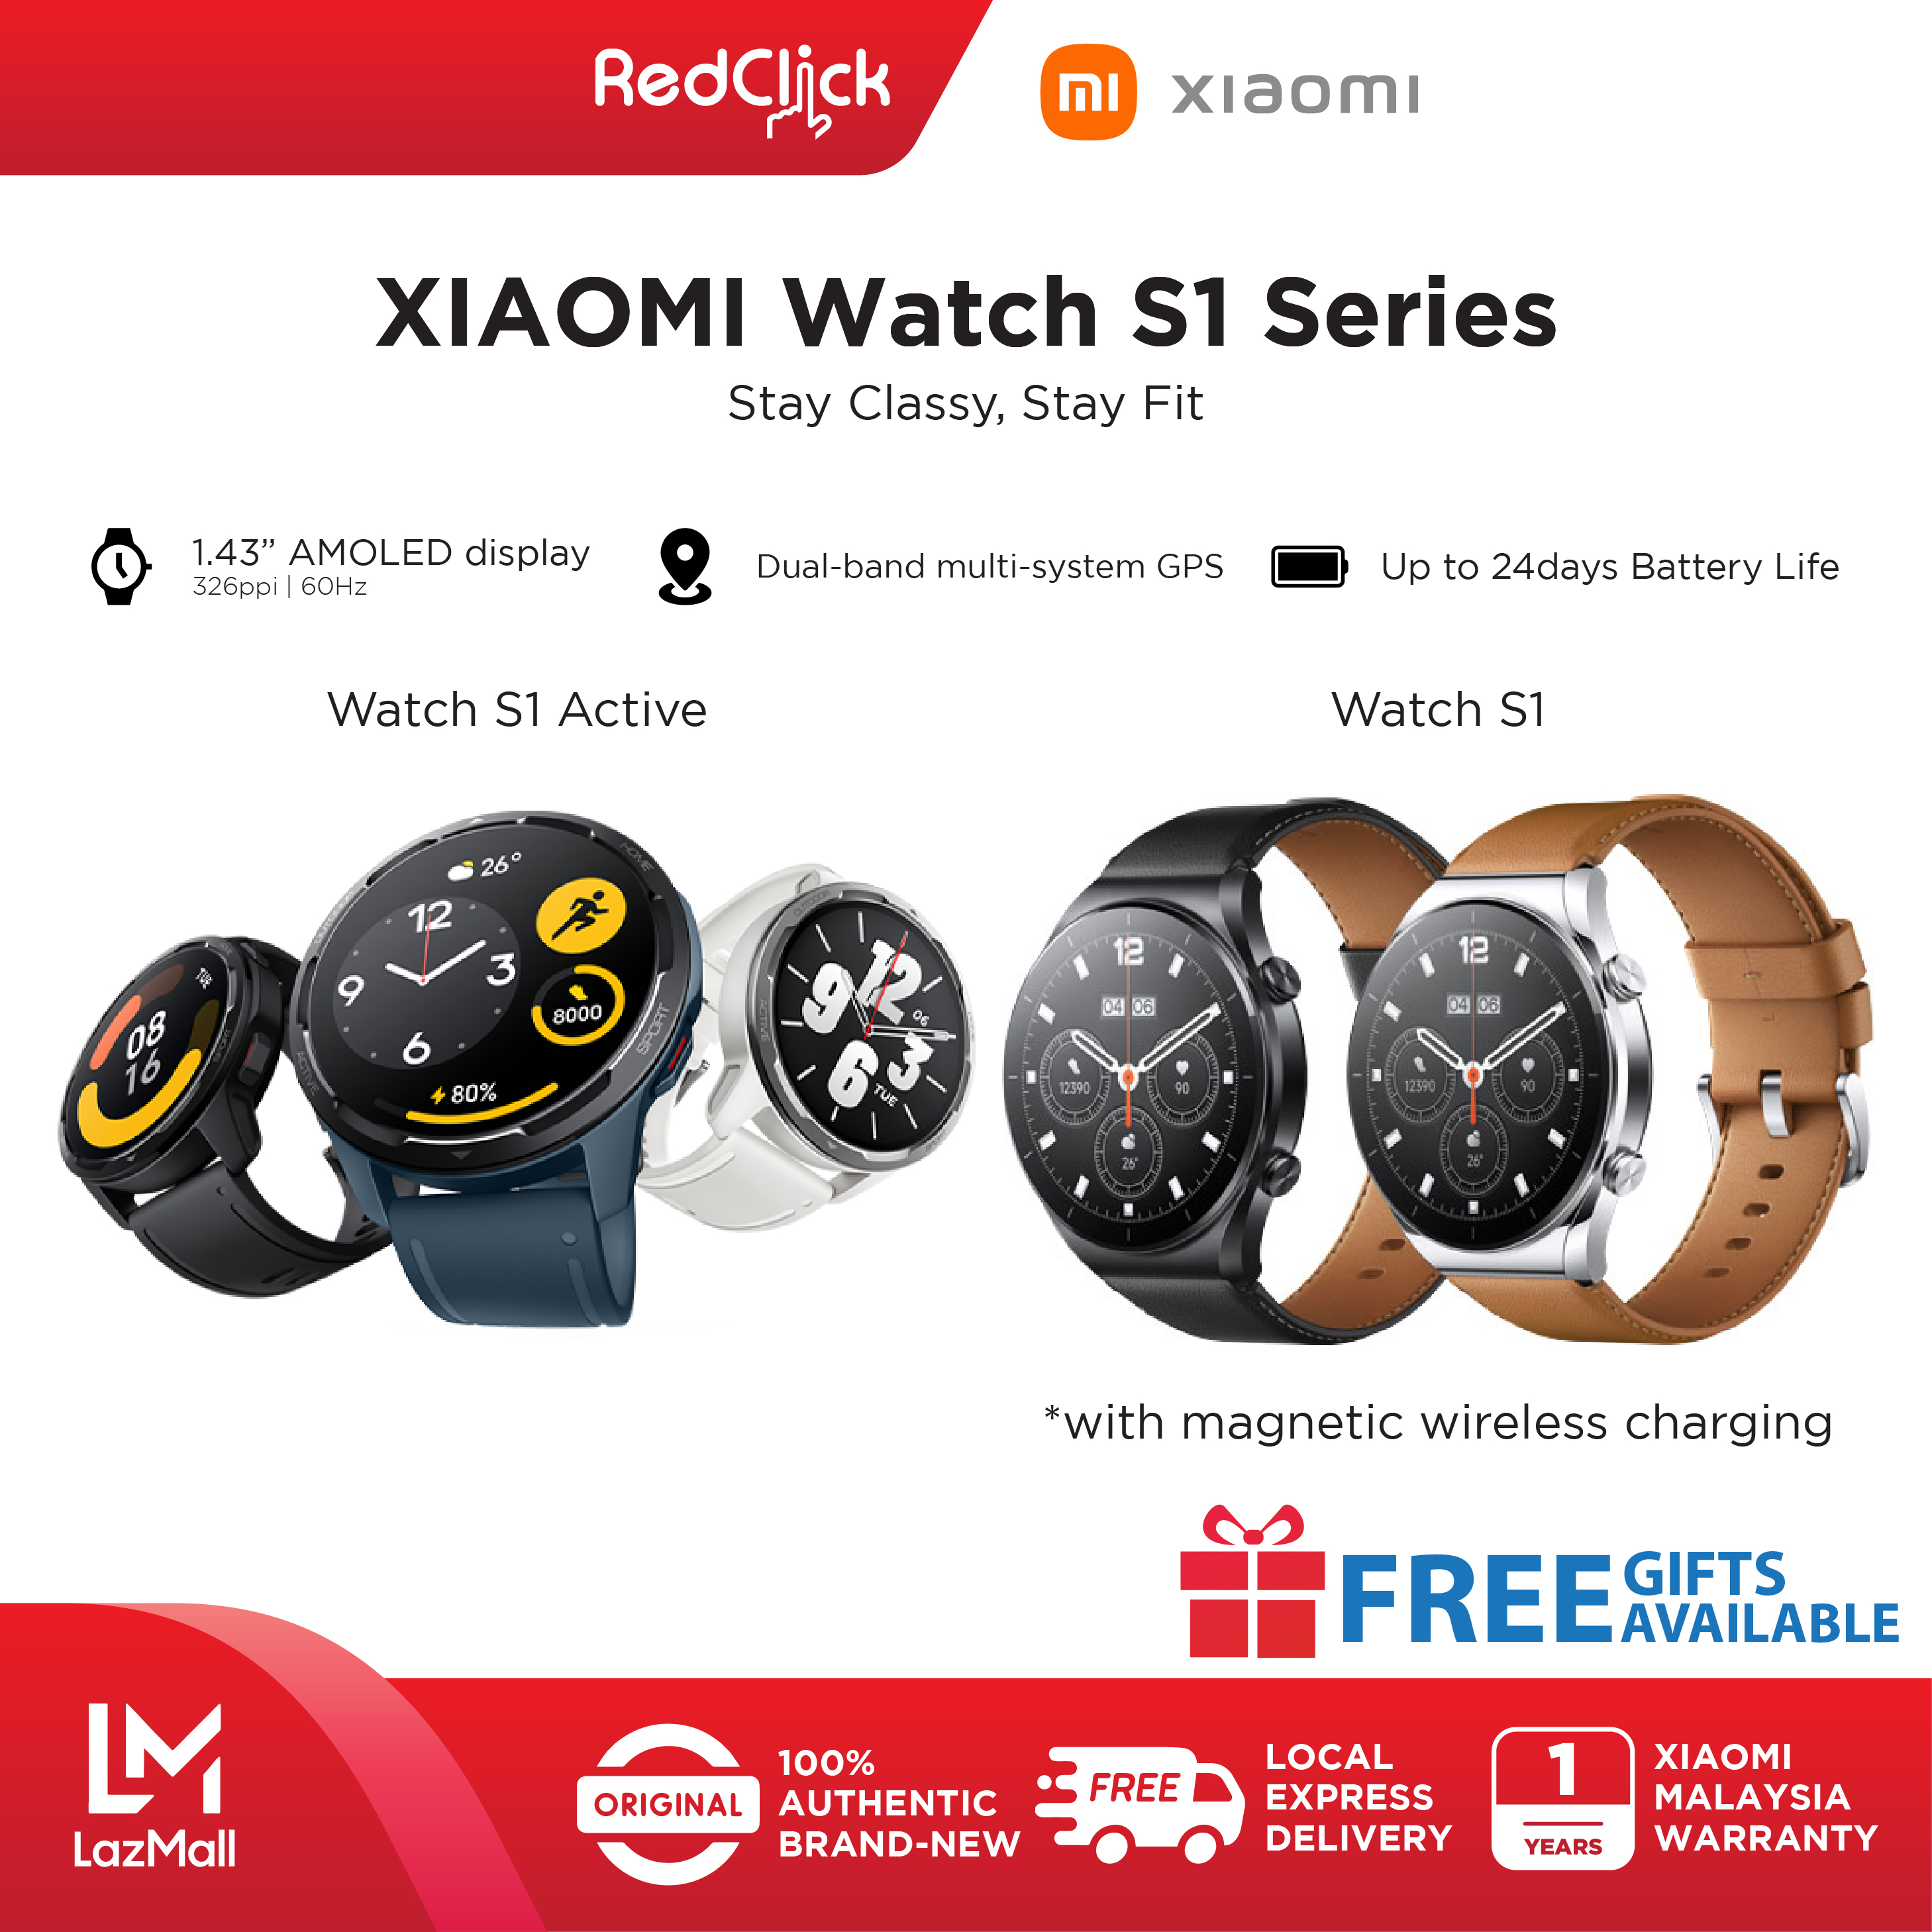 Xiaomi Watch S1 / S1 Active 1.43" AMOLED SUPPORT 117 Fitness Modes 24 Days Battery Life Support Blood Oxygen All Day Heart Rate and Bluetooth Phone Calls Original Xiaomi Product+ 4 Free Gift worth RM149